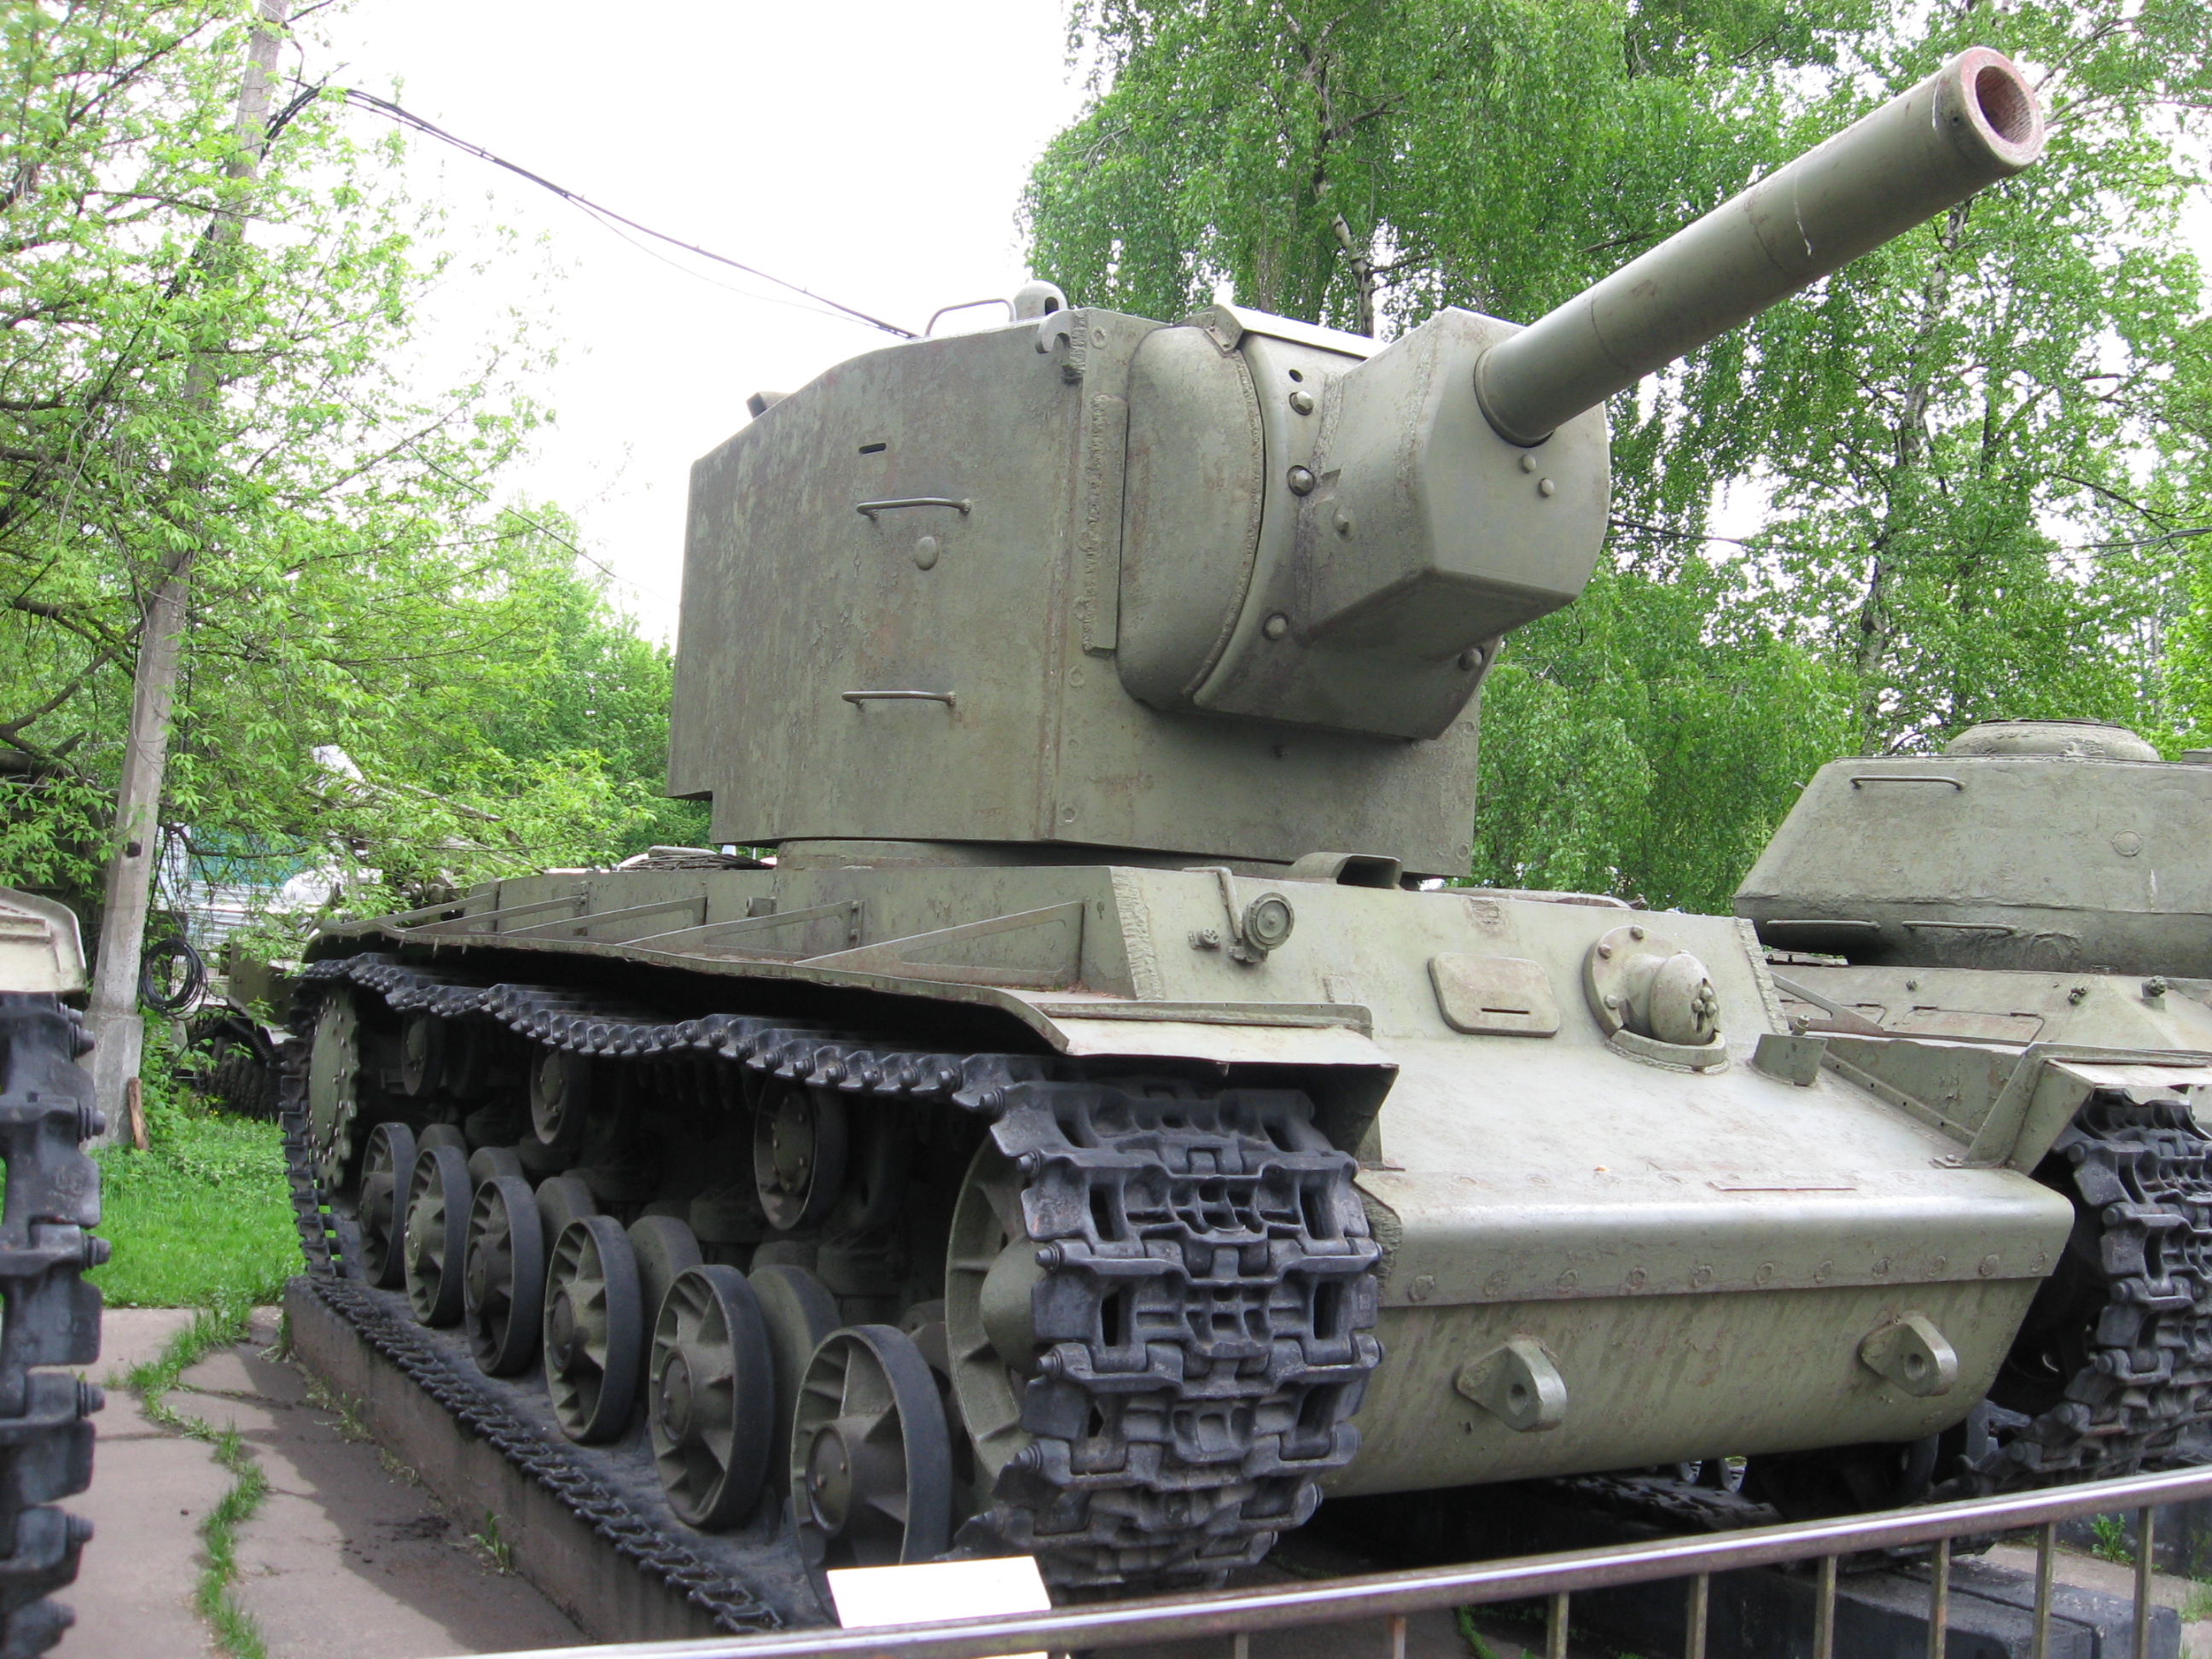 http://de.academic.ru/pictures/dewiki/75/Kv-2_in_the_Moscow_museum_of_armed_forces.jpg